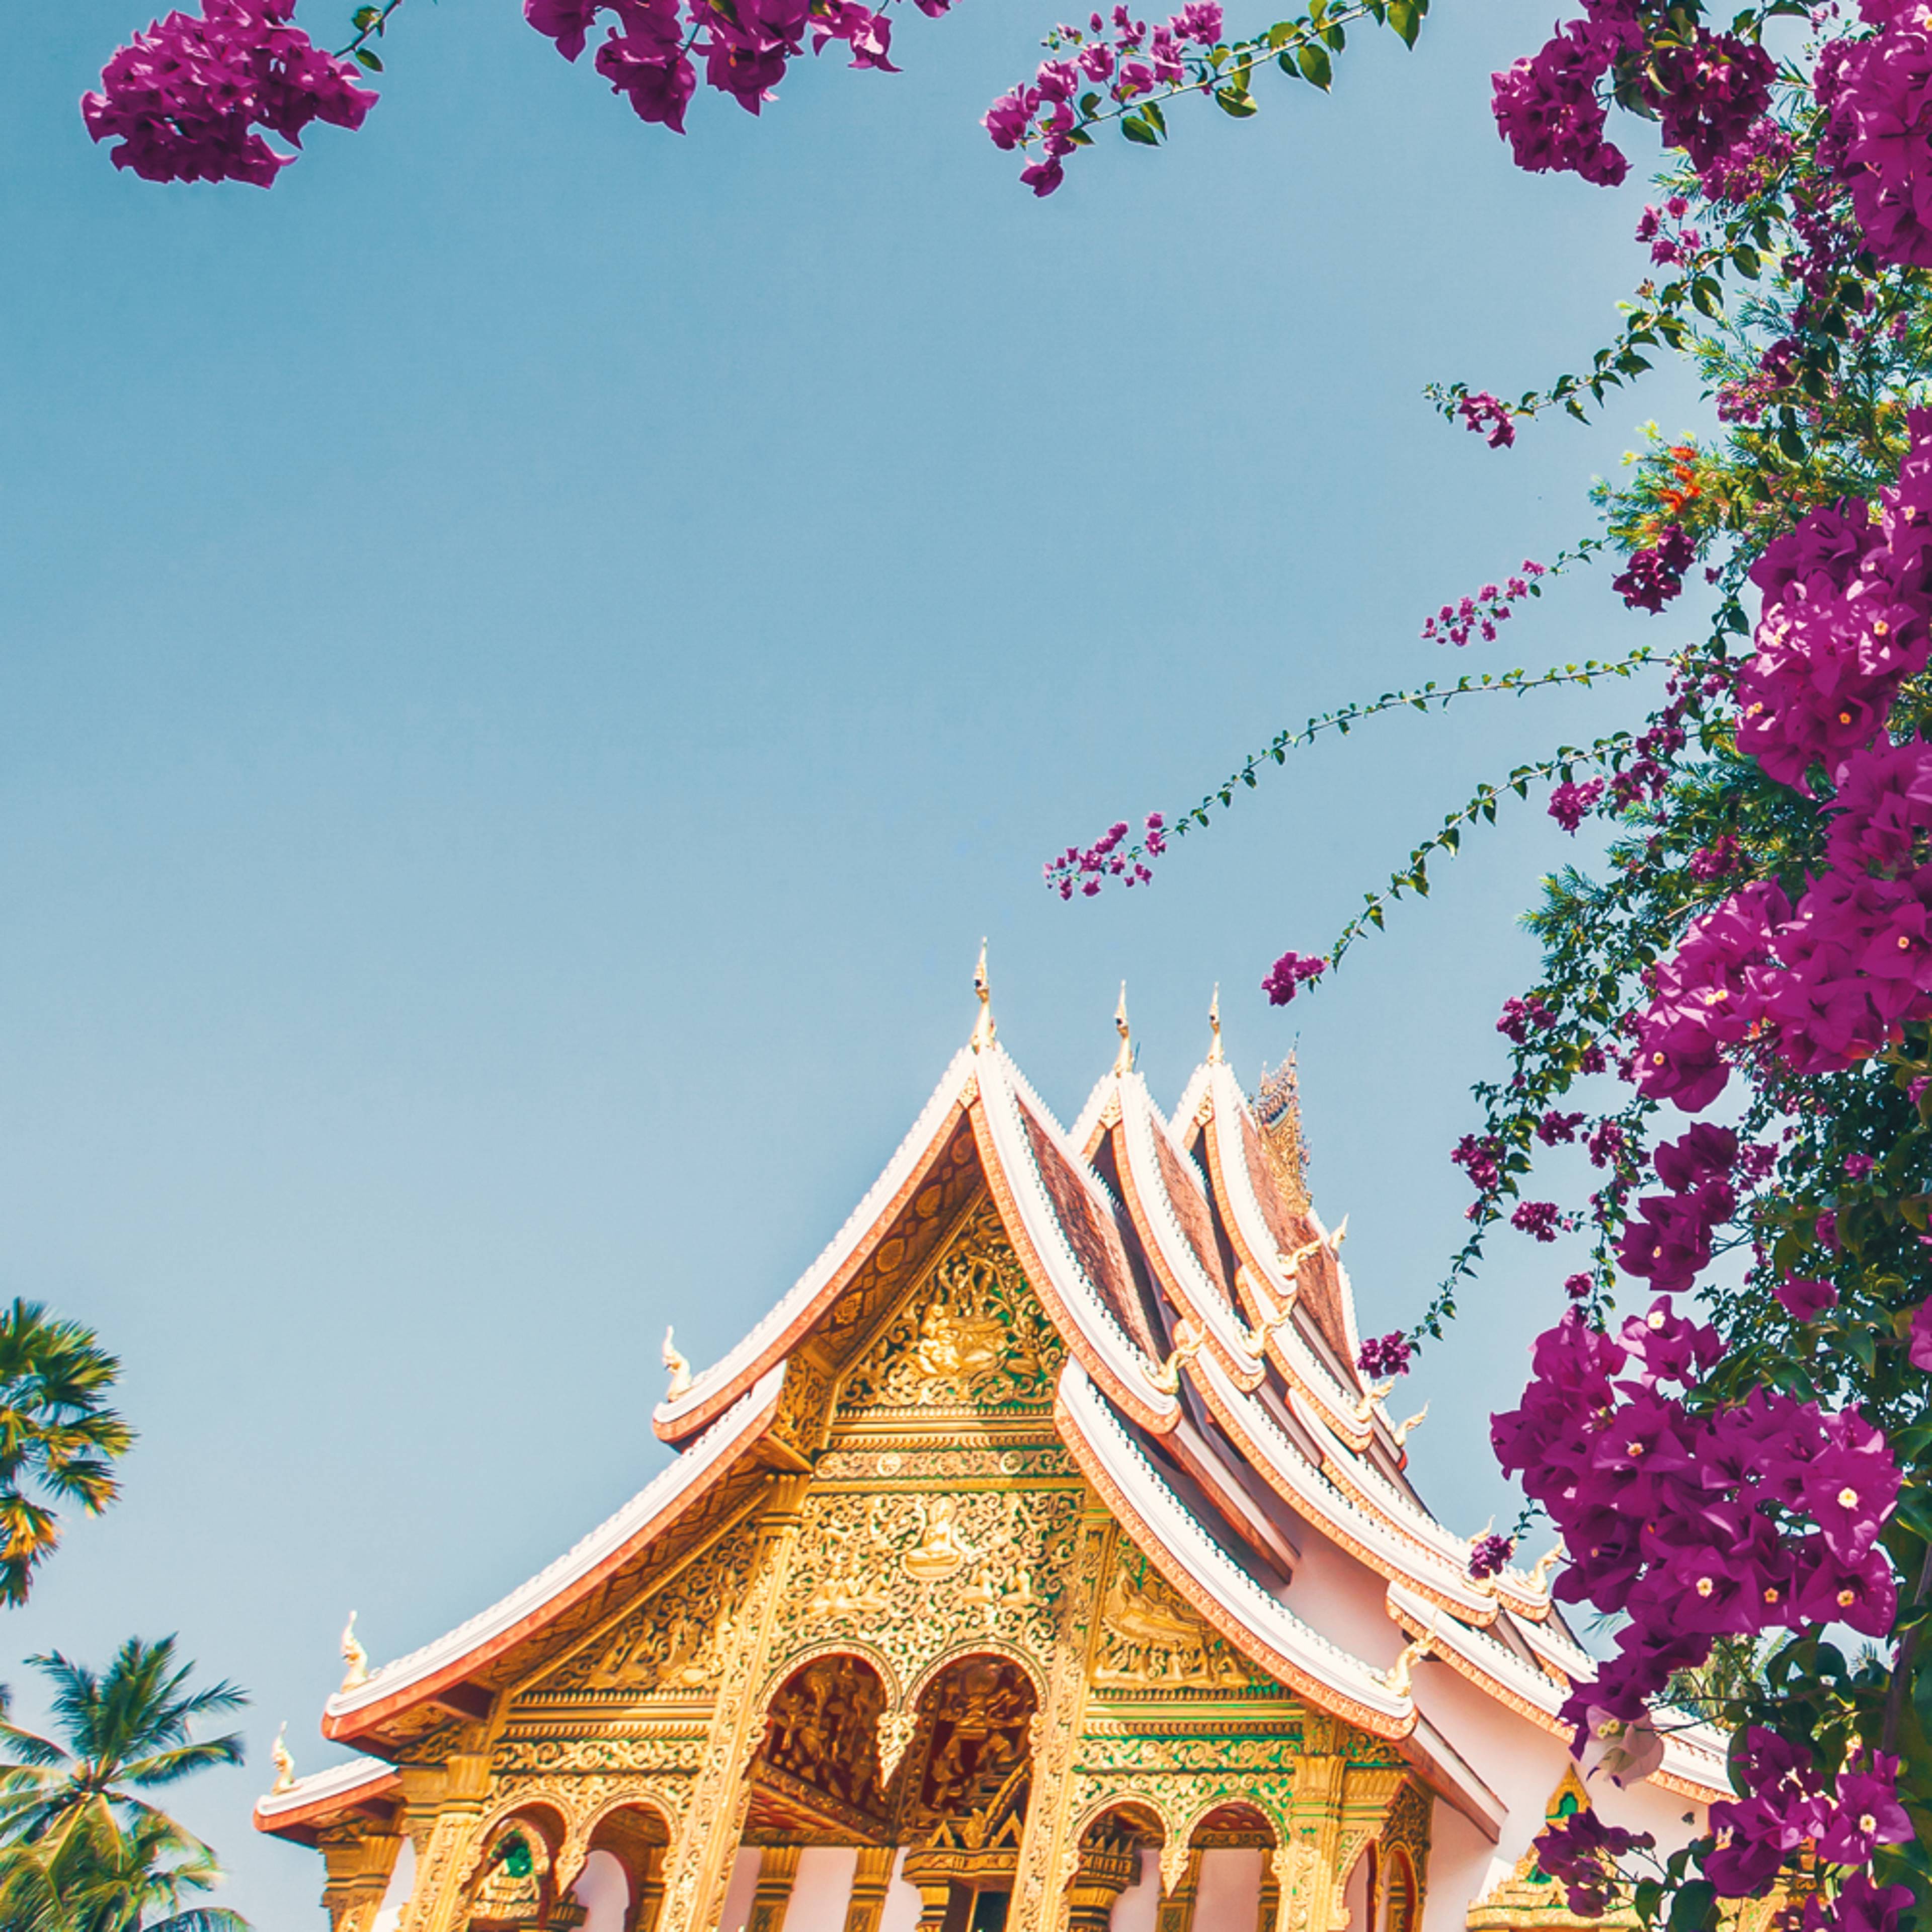 Design your perfect summer holiday in Laos with a local expert